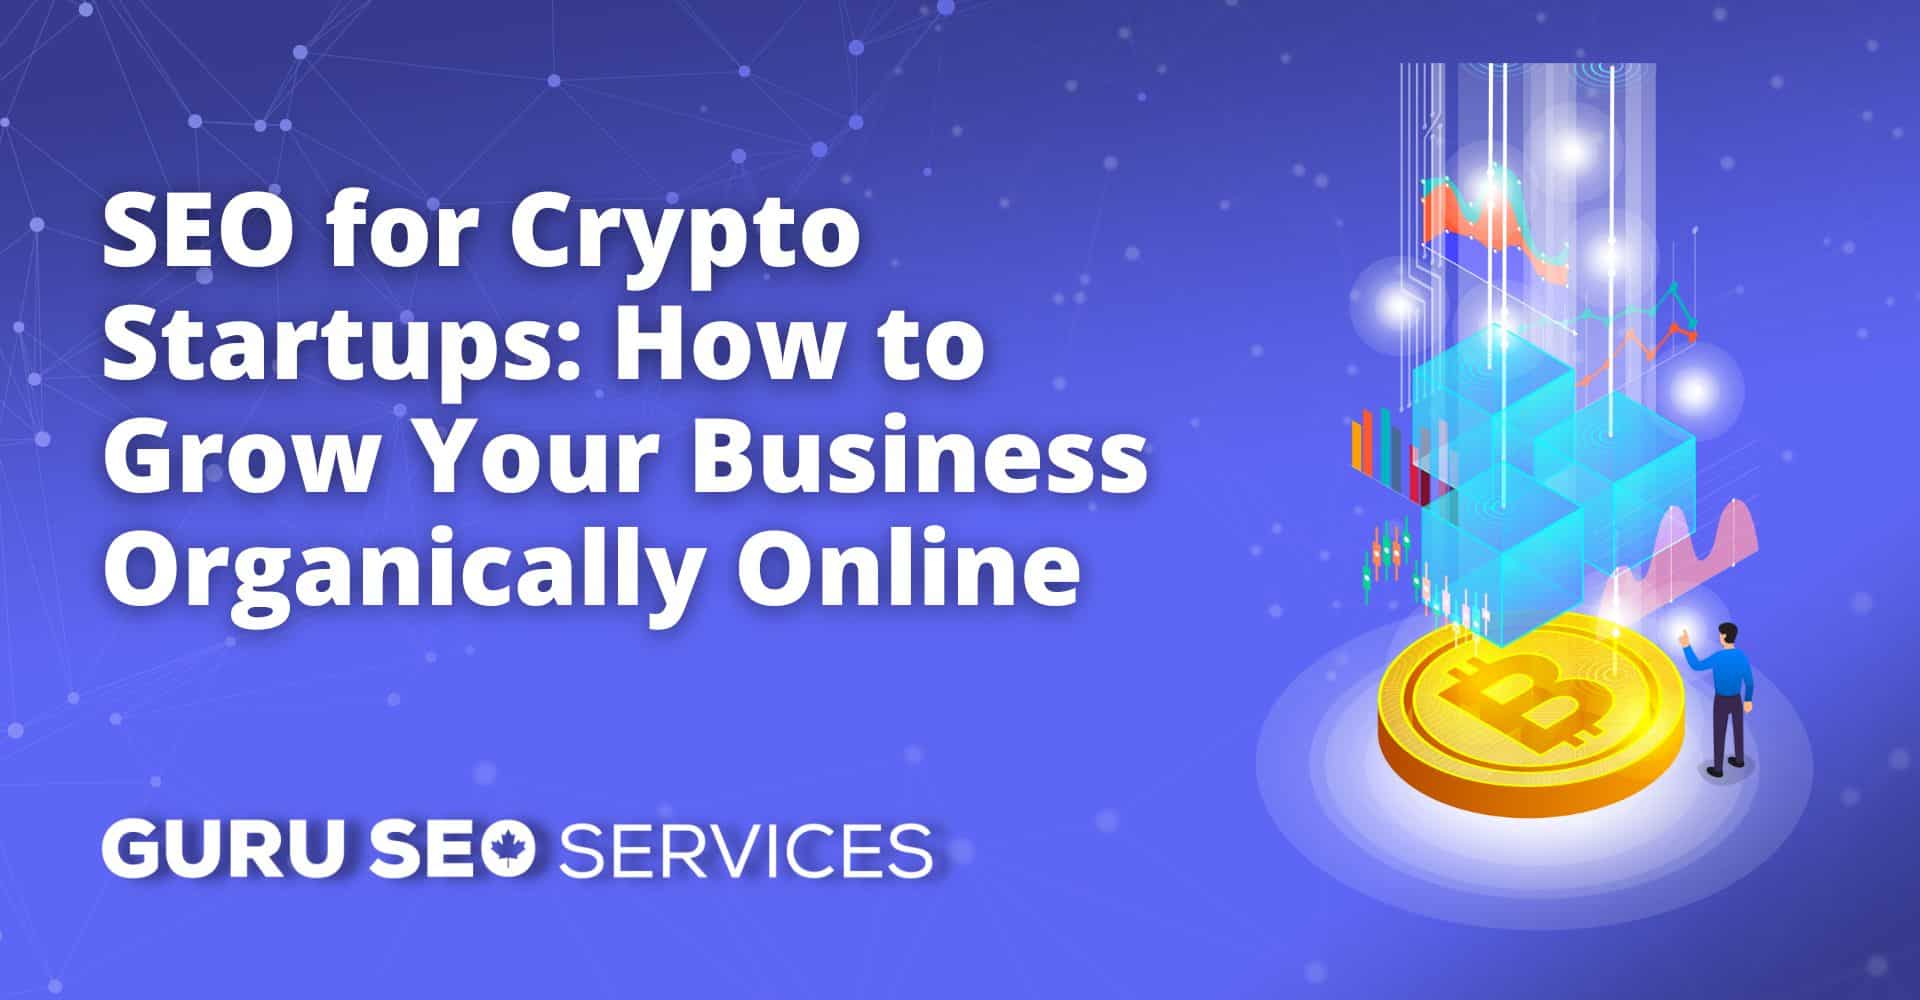 SEO services for crypto startups to help your business grow organically online.